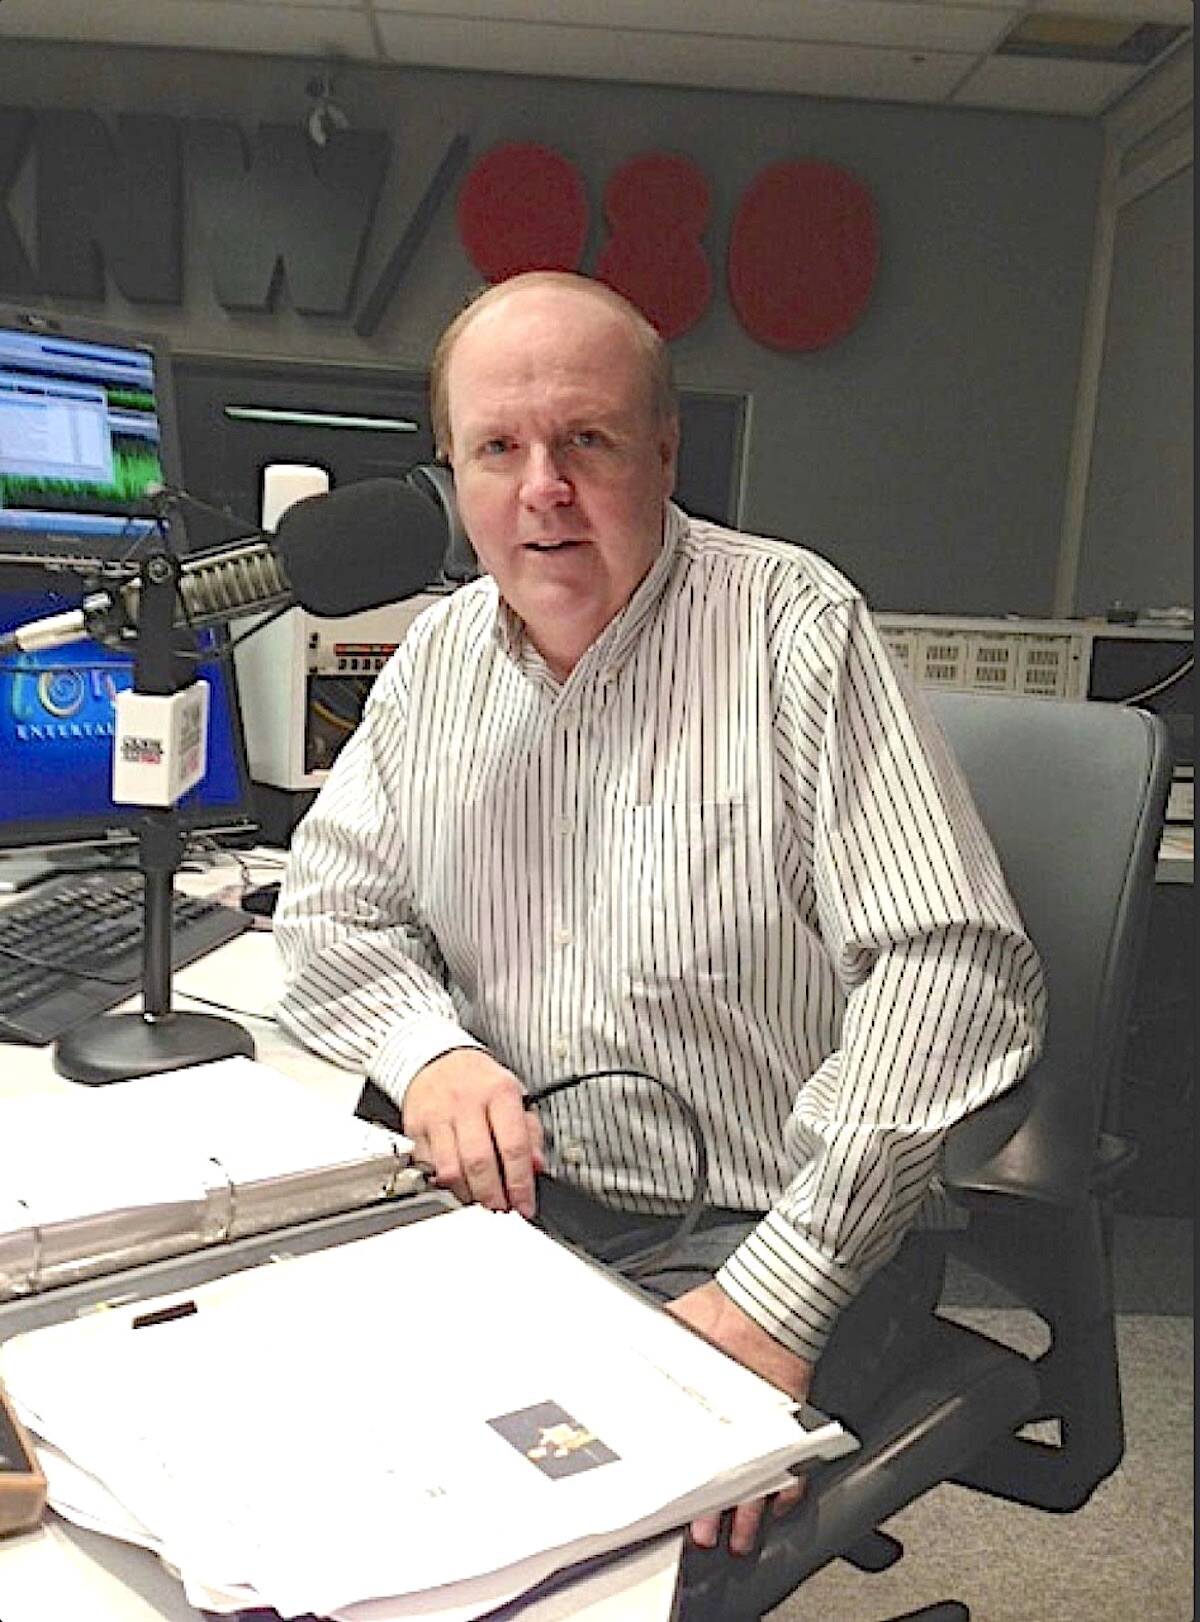 Sports broadcaster Dan Russell on the job at CKNW radio station in Vancouver. (Submitted photo)